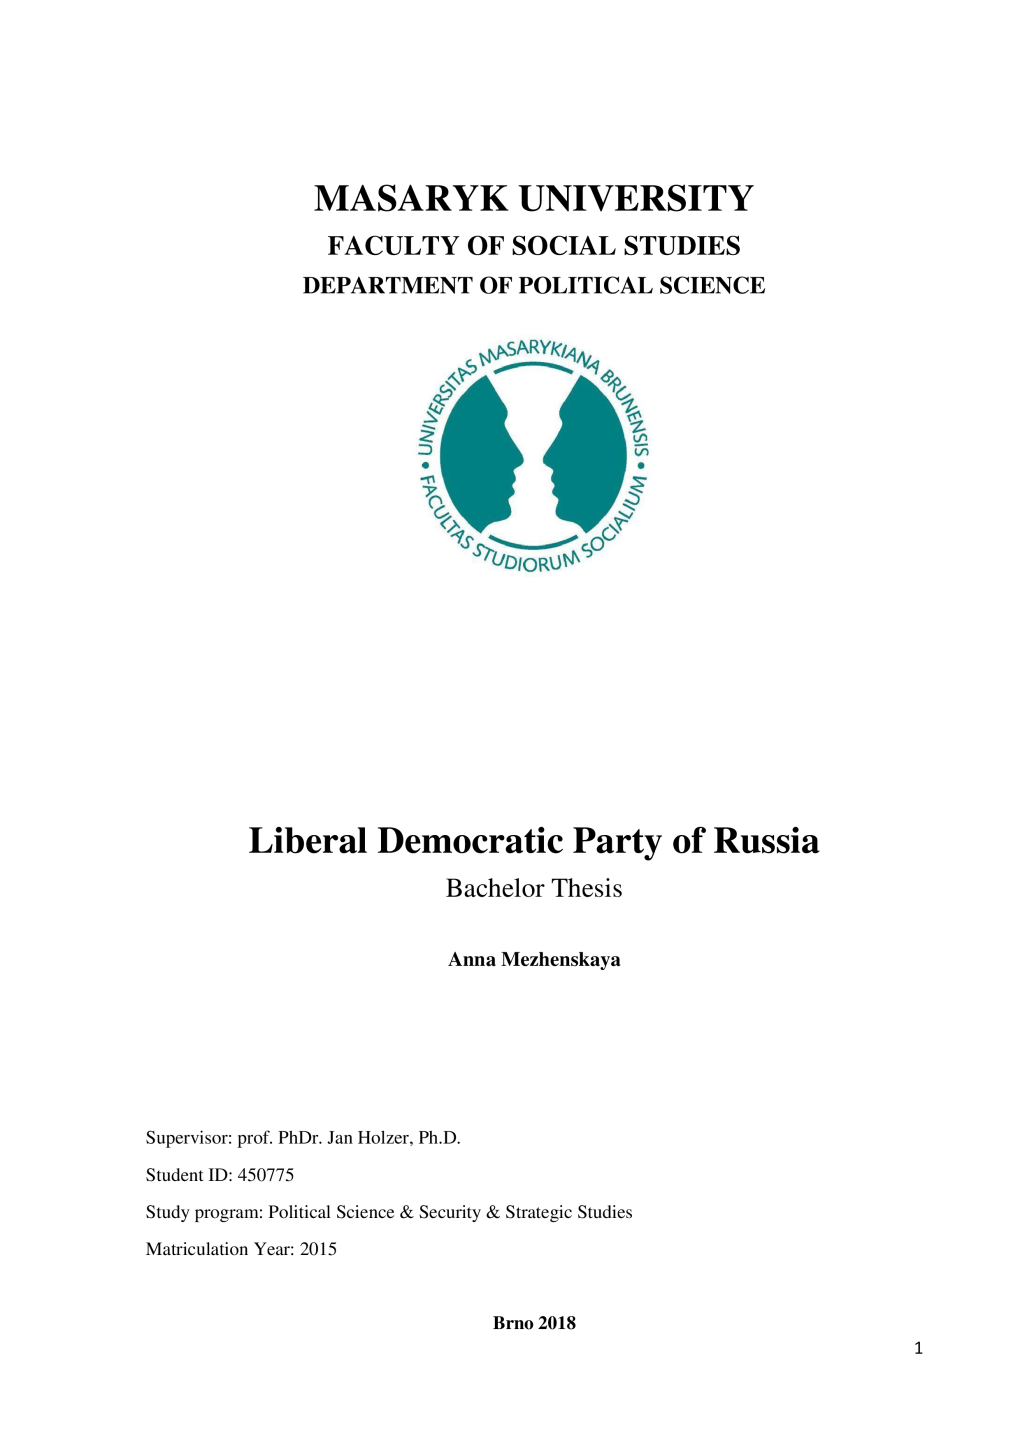 MASARYK UNIVERSITY Liberal Democratic Party of Russia